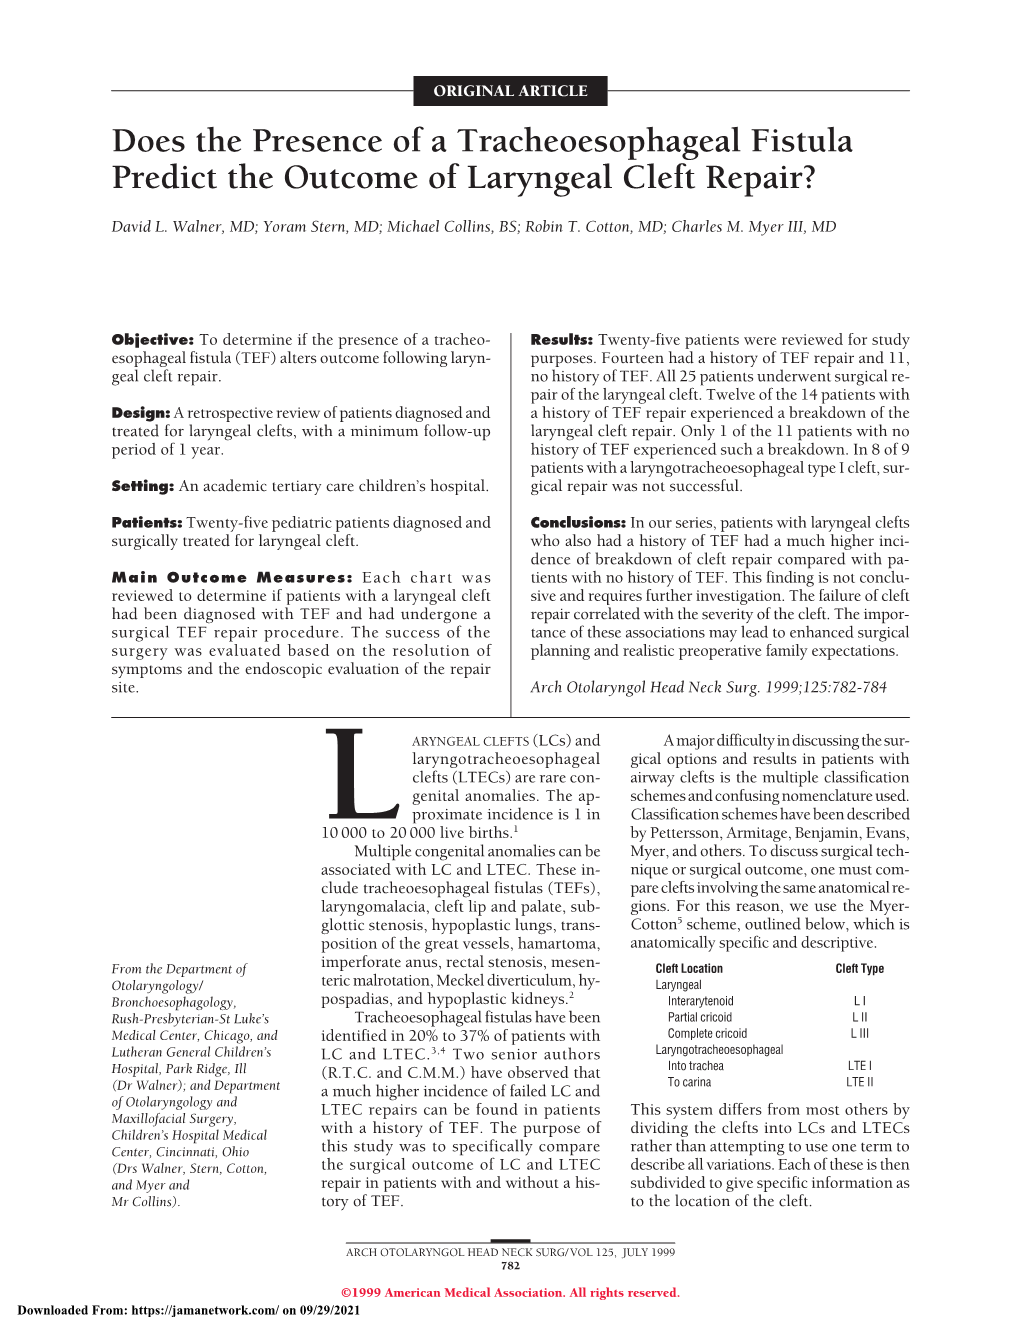 Does the Presence of a Tracheoesophageal Fistula Predict the Outcome of Laryngeal Cleft Repair?